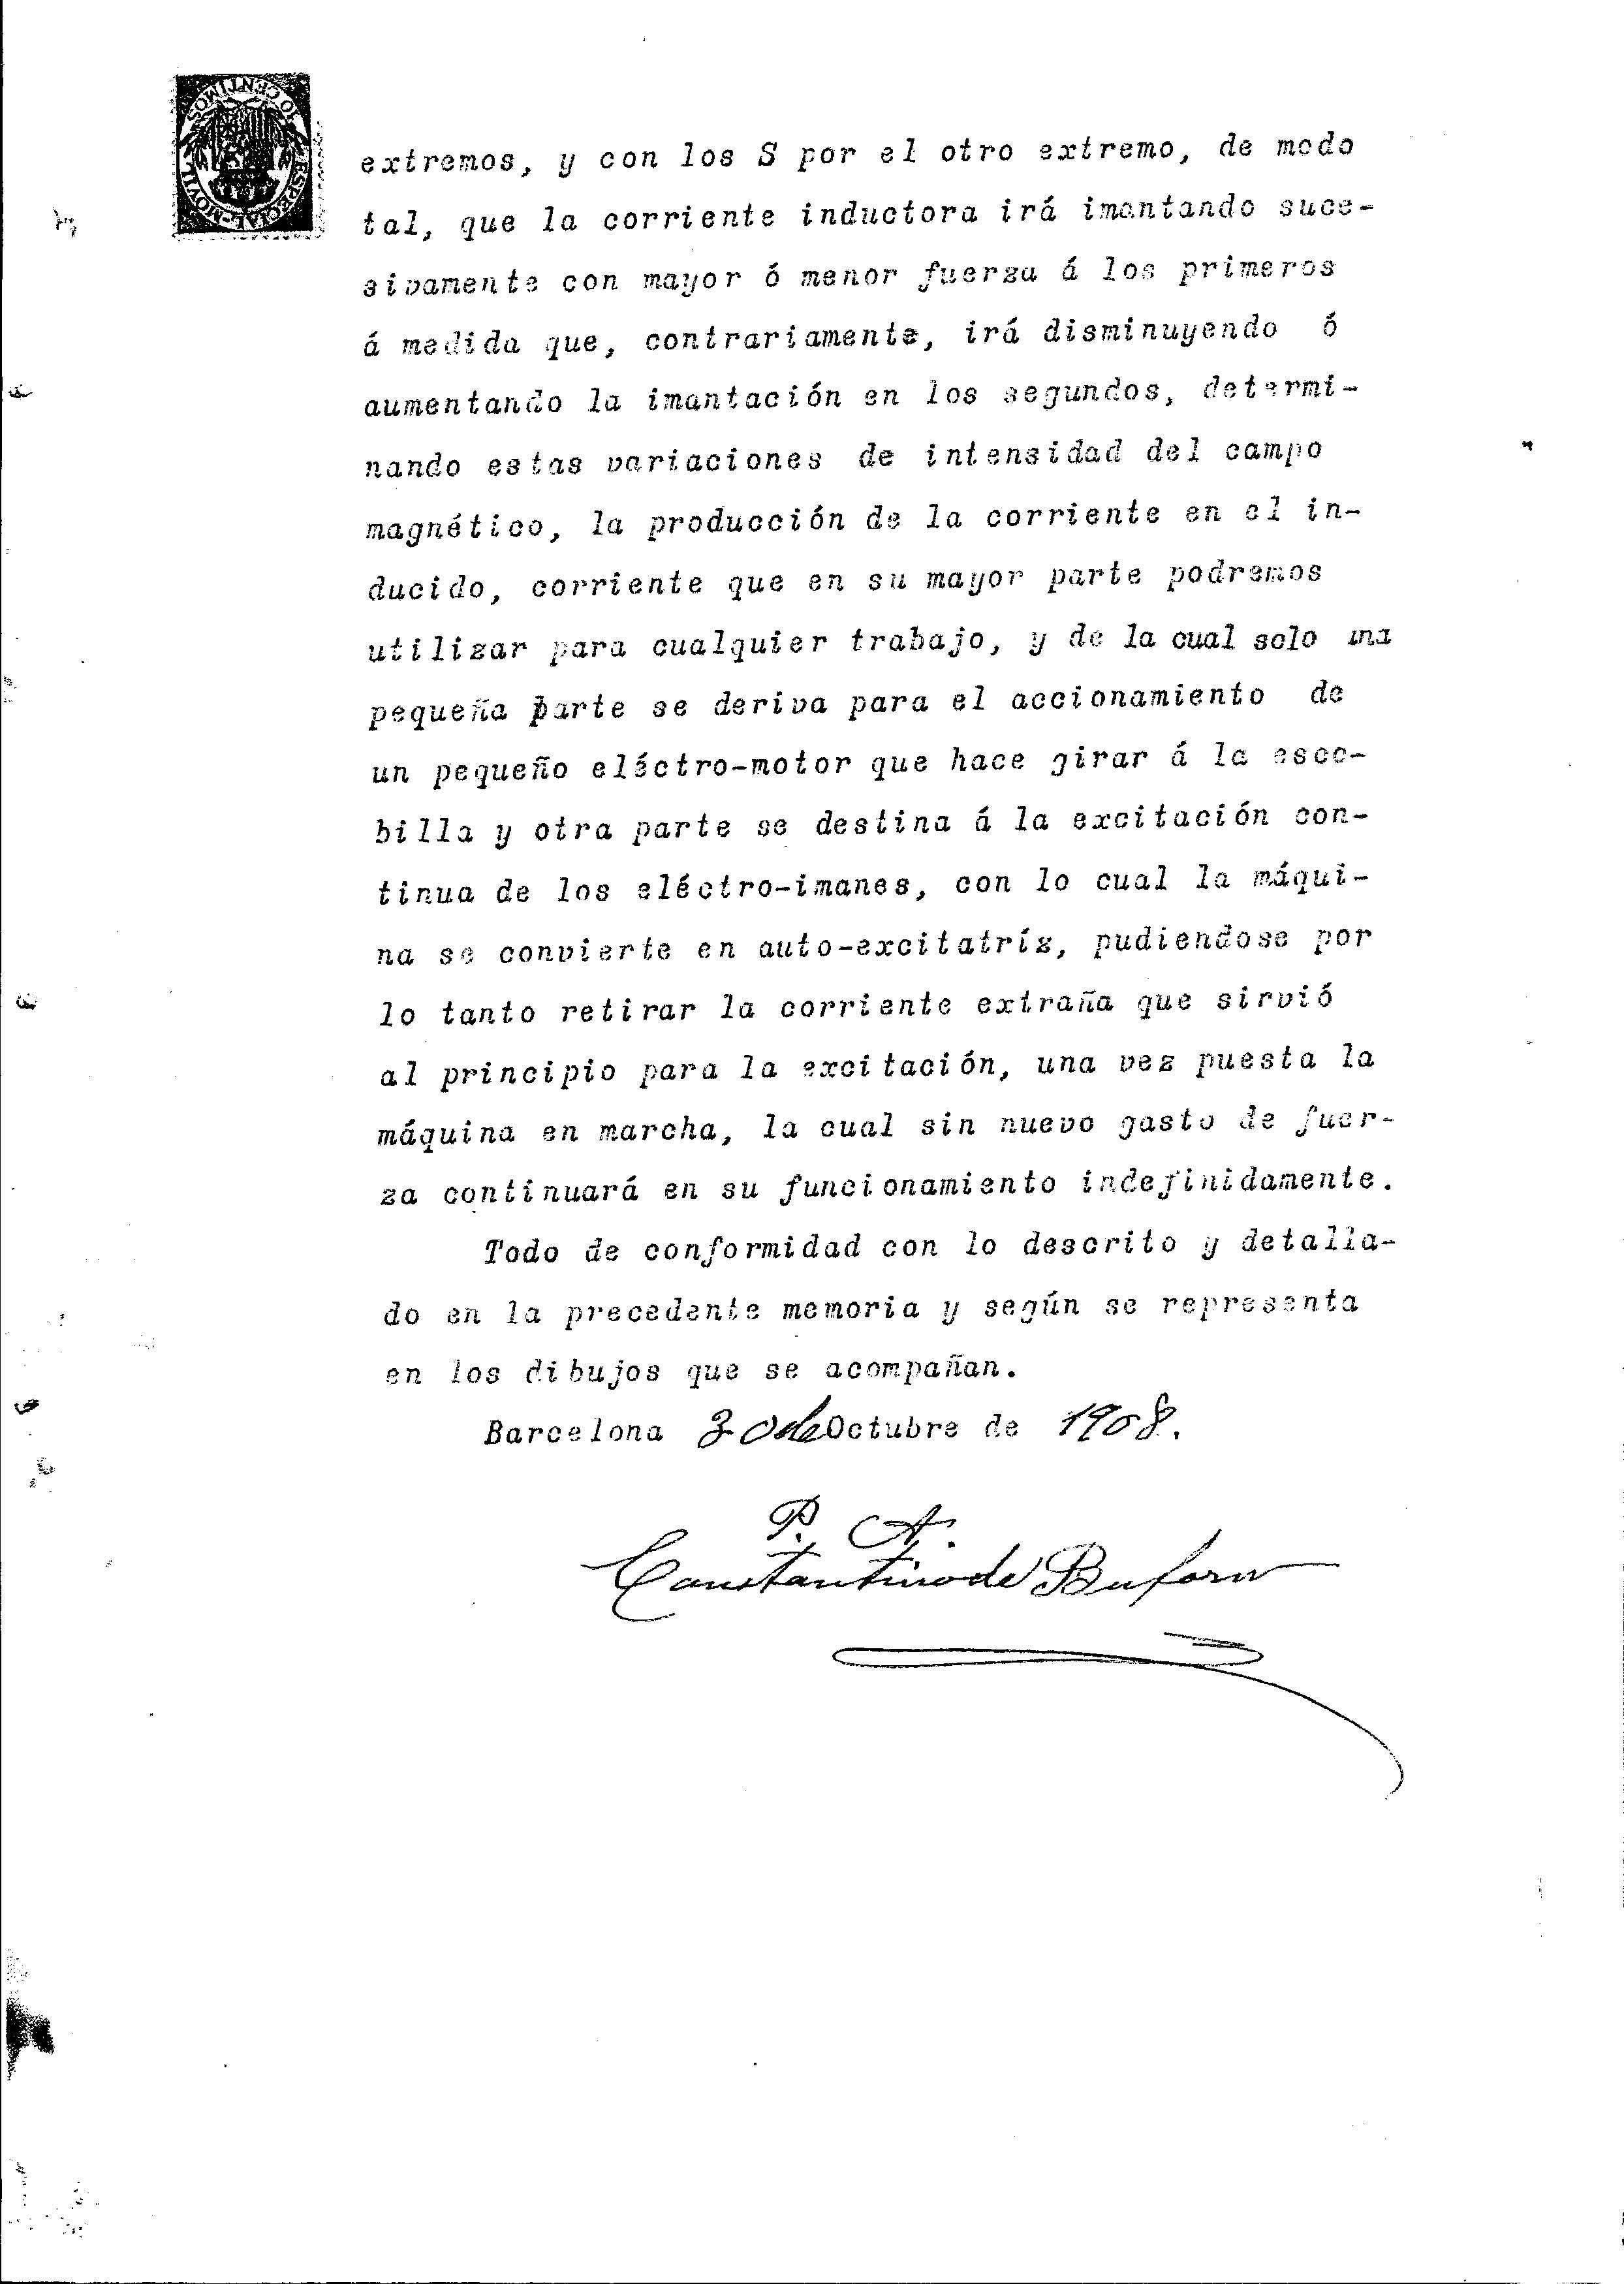 Clemente Figuera Patente 1908_Num_44267_scanned_OCR_Page_10.jpg